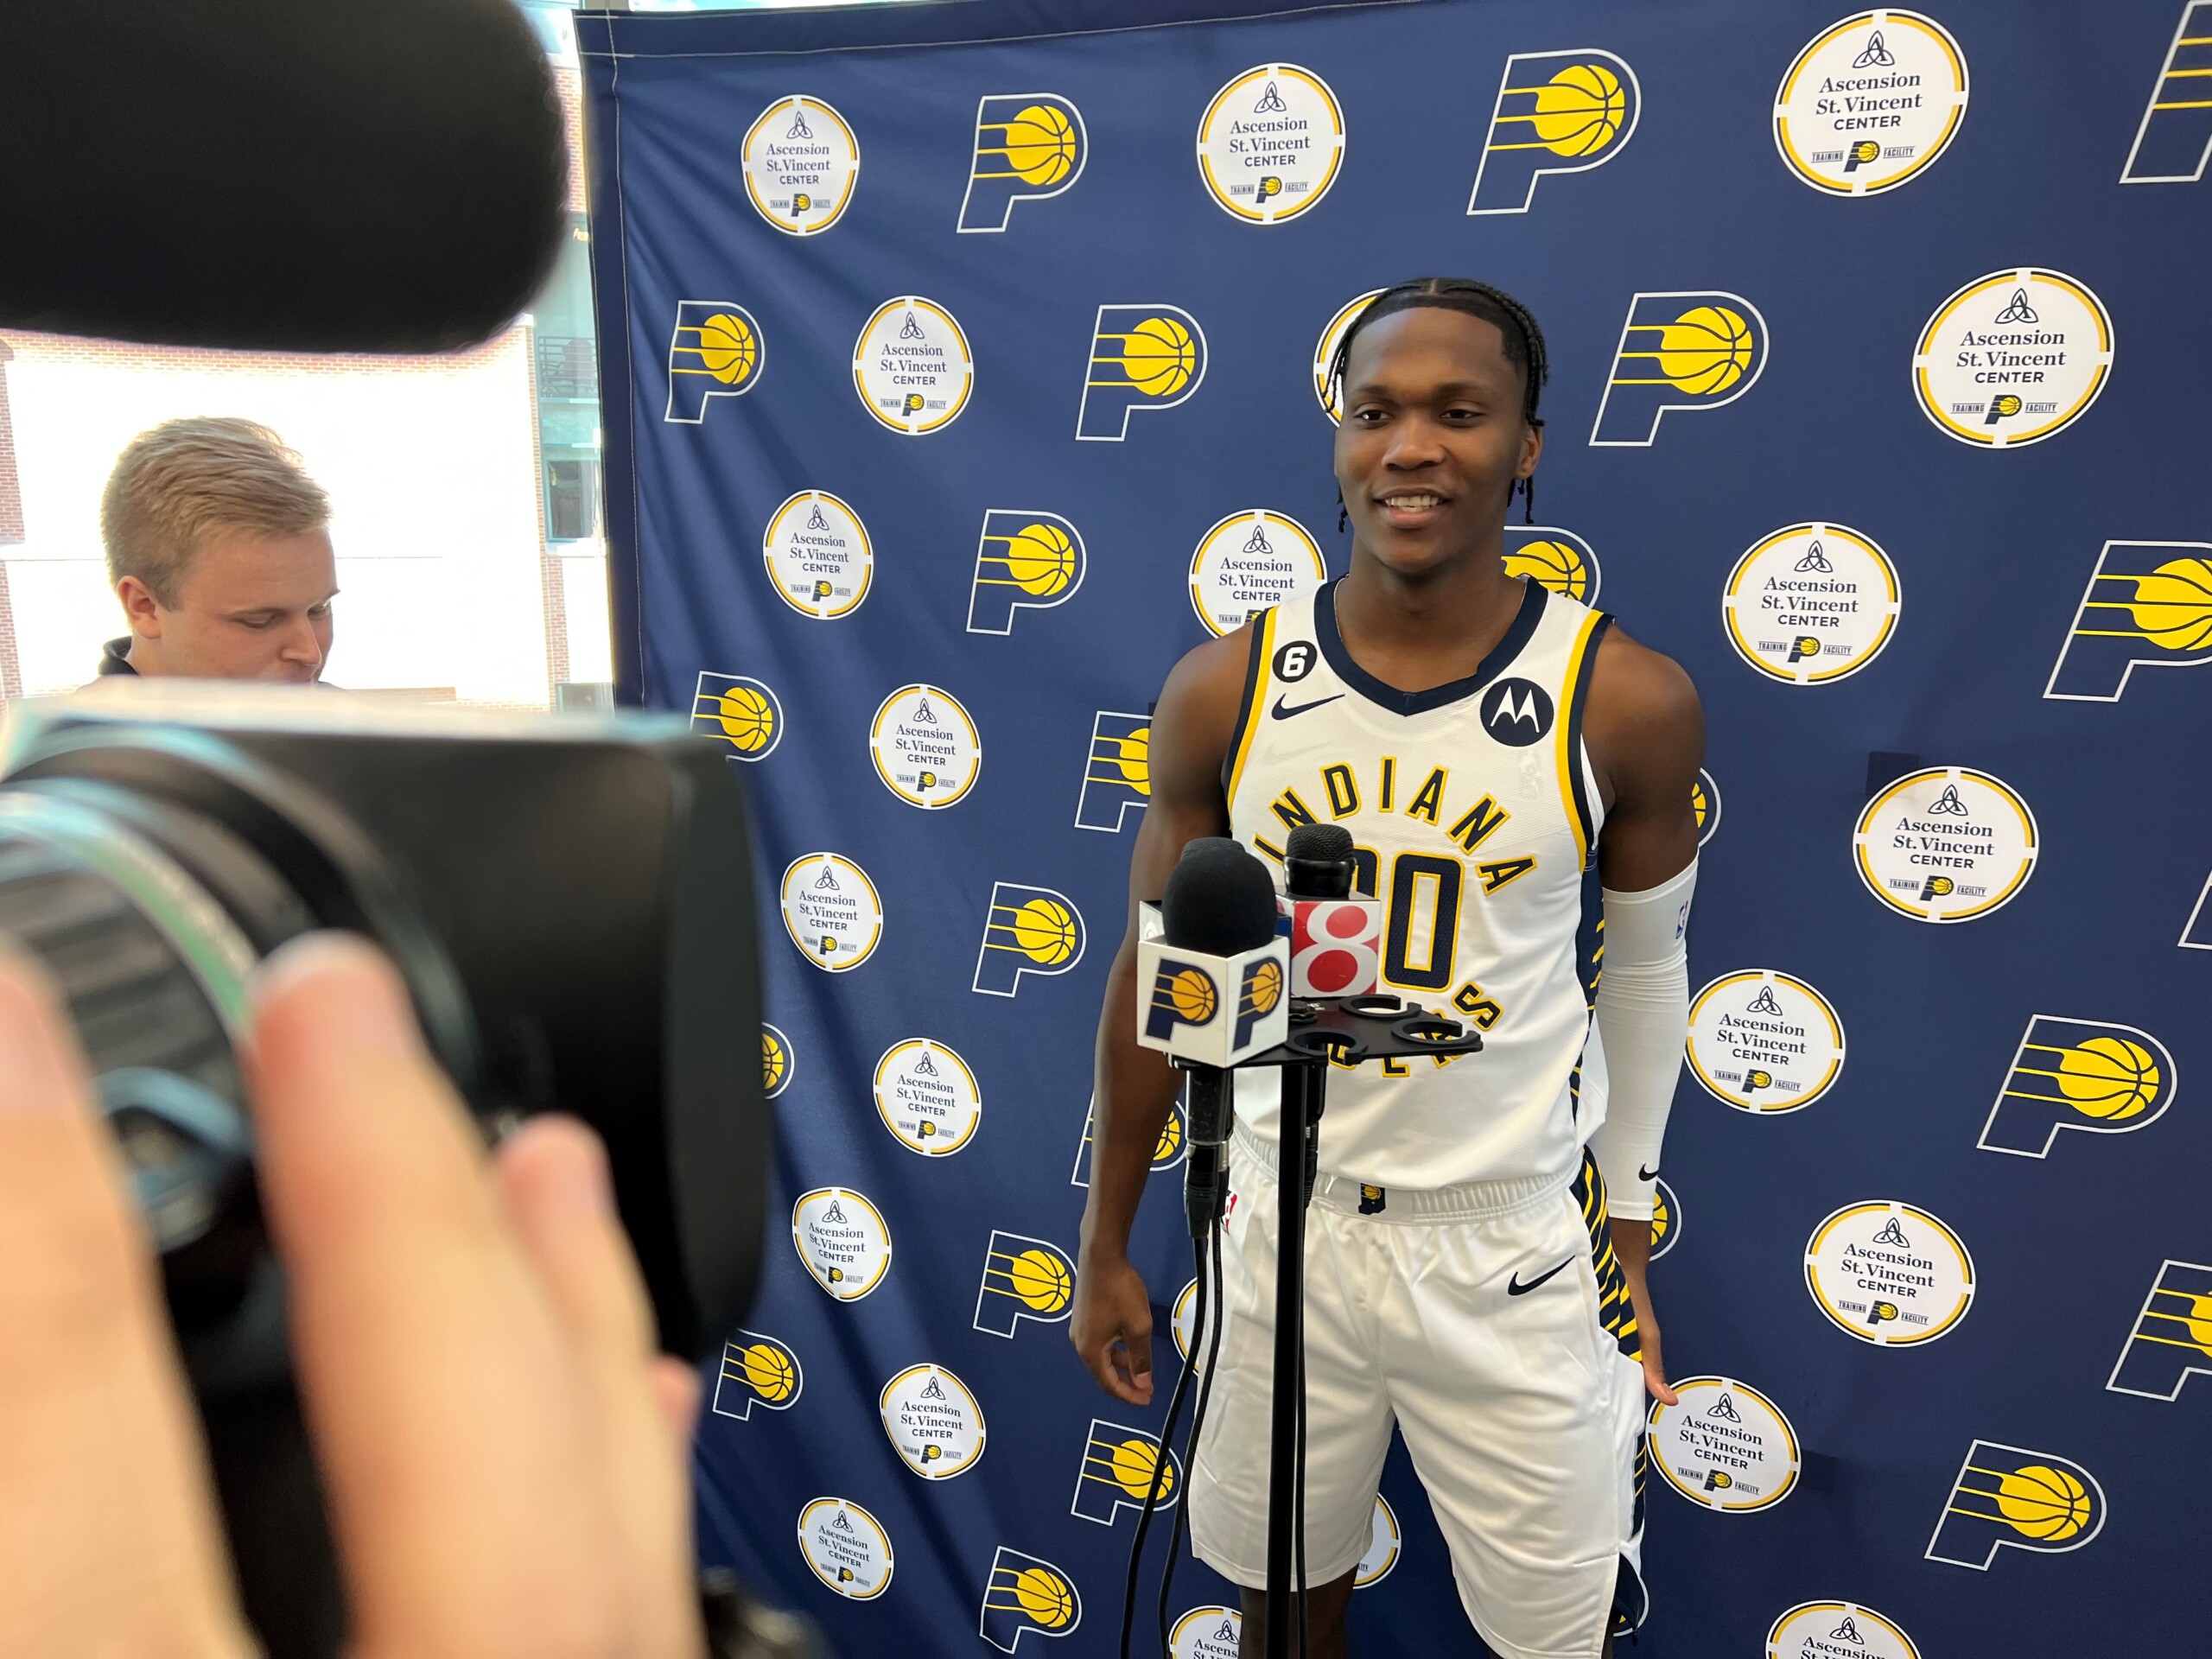 Turner’s contract, young additions headline Pacers Media Day